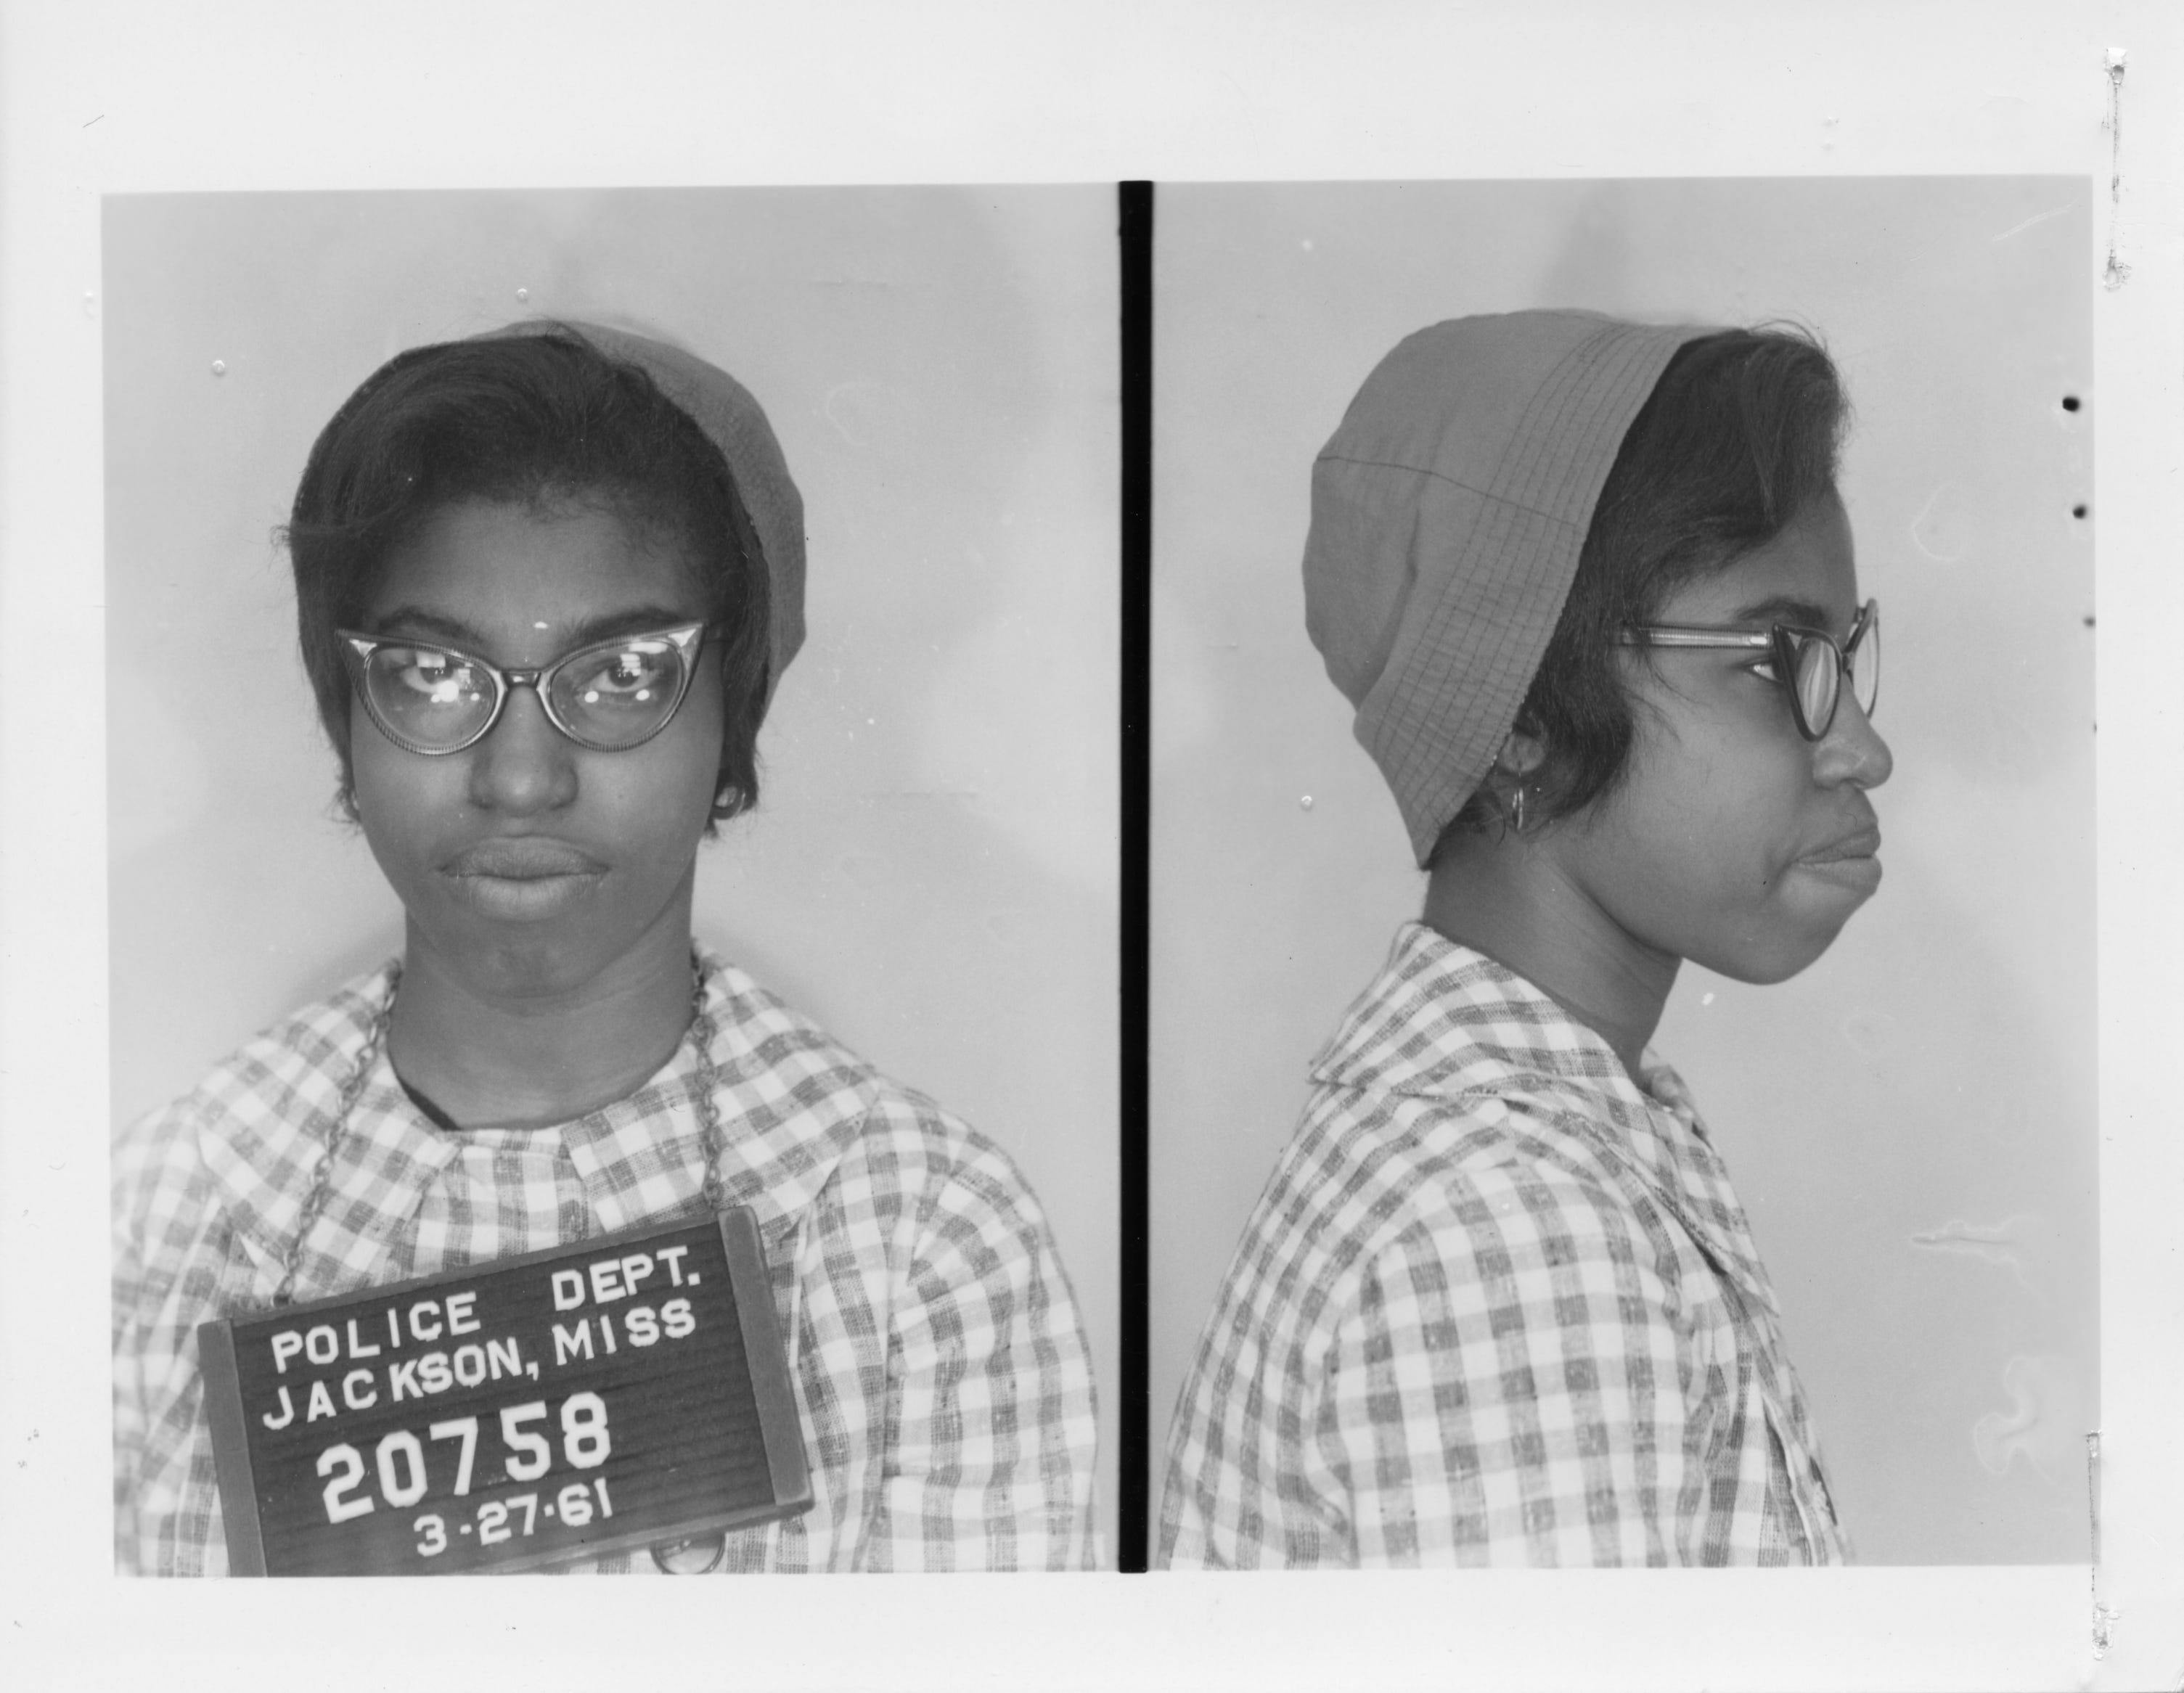 Police booking photo of Geraldine Edwards, one of the "Tougaloo 9" students who were arrested on March 27, 1961 for entering the all-white library in Jackson, Miss.
